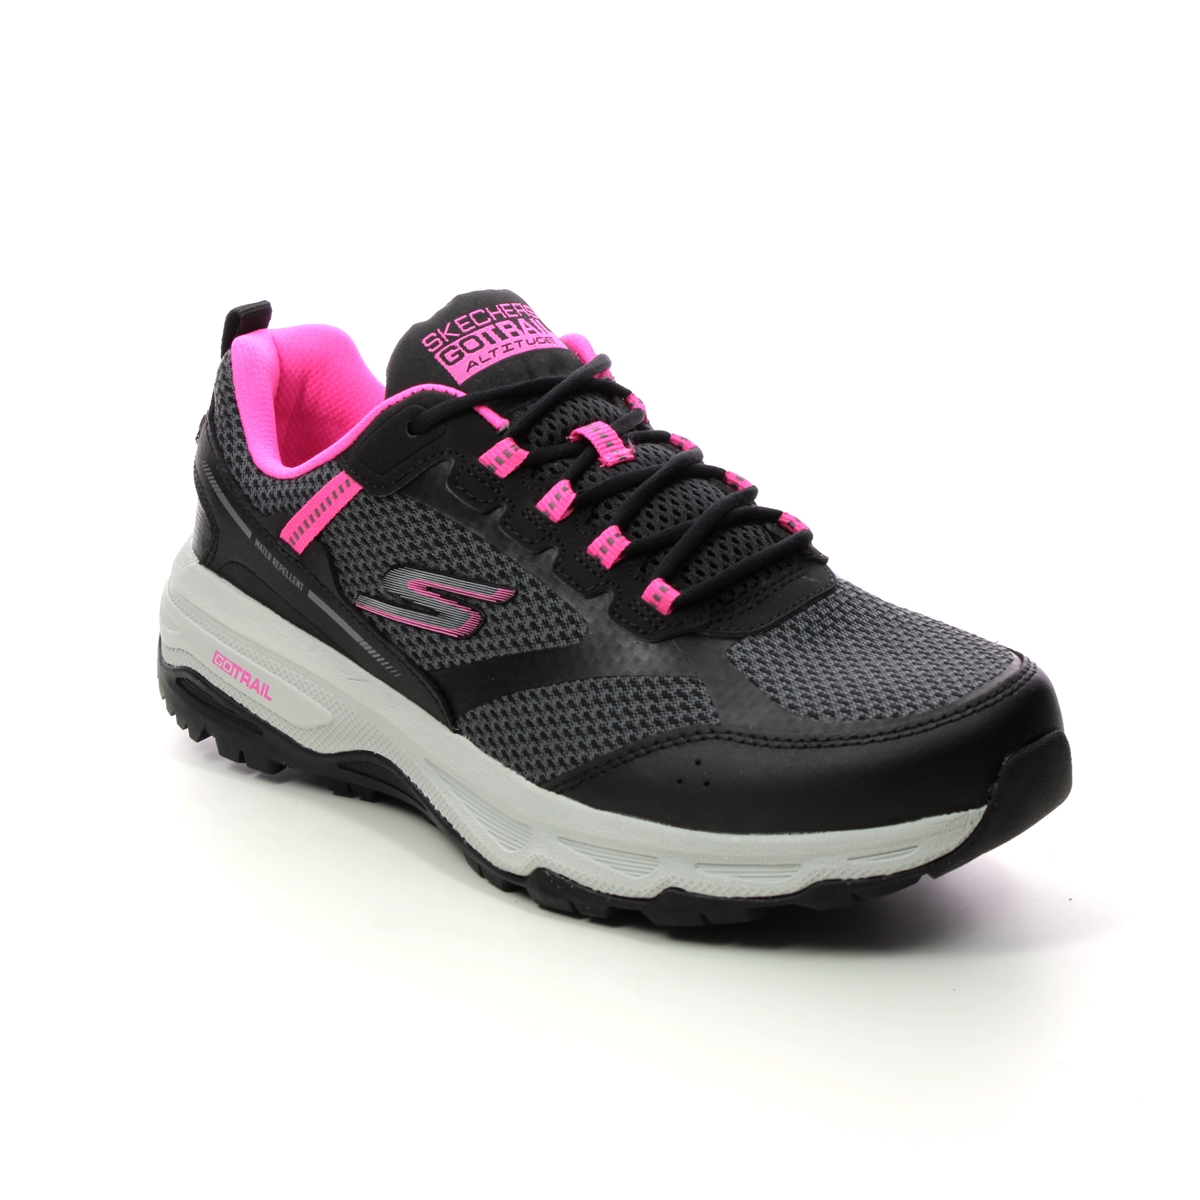 Skechers Go Run Trail Black Pink Womens Trainers 128200 In Size 7 In Plain Black Pink